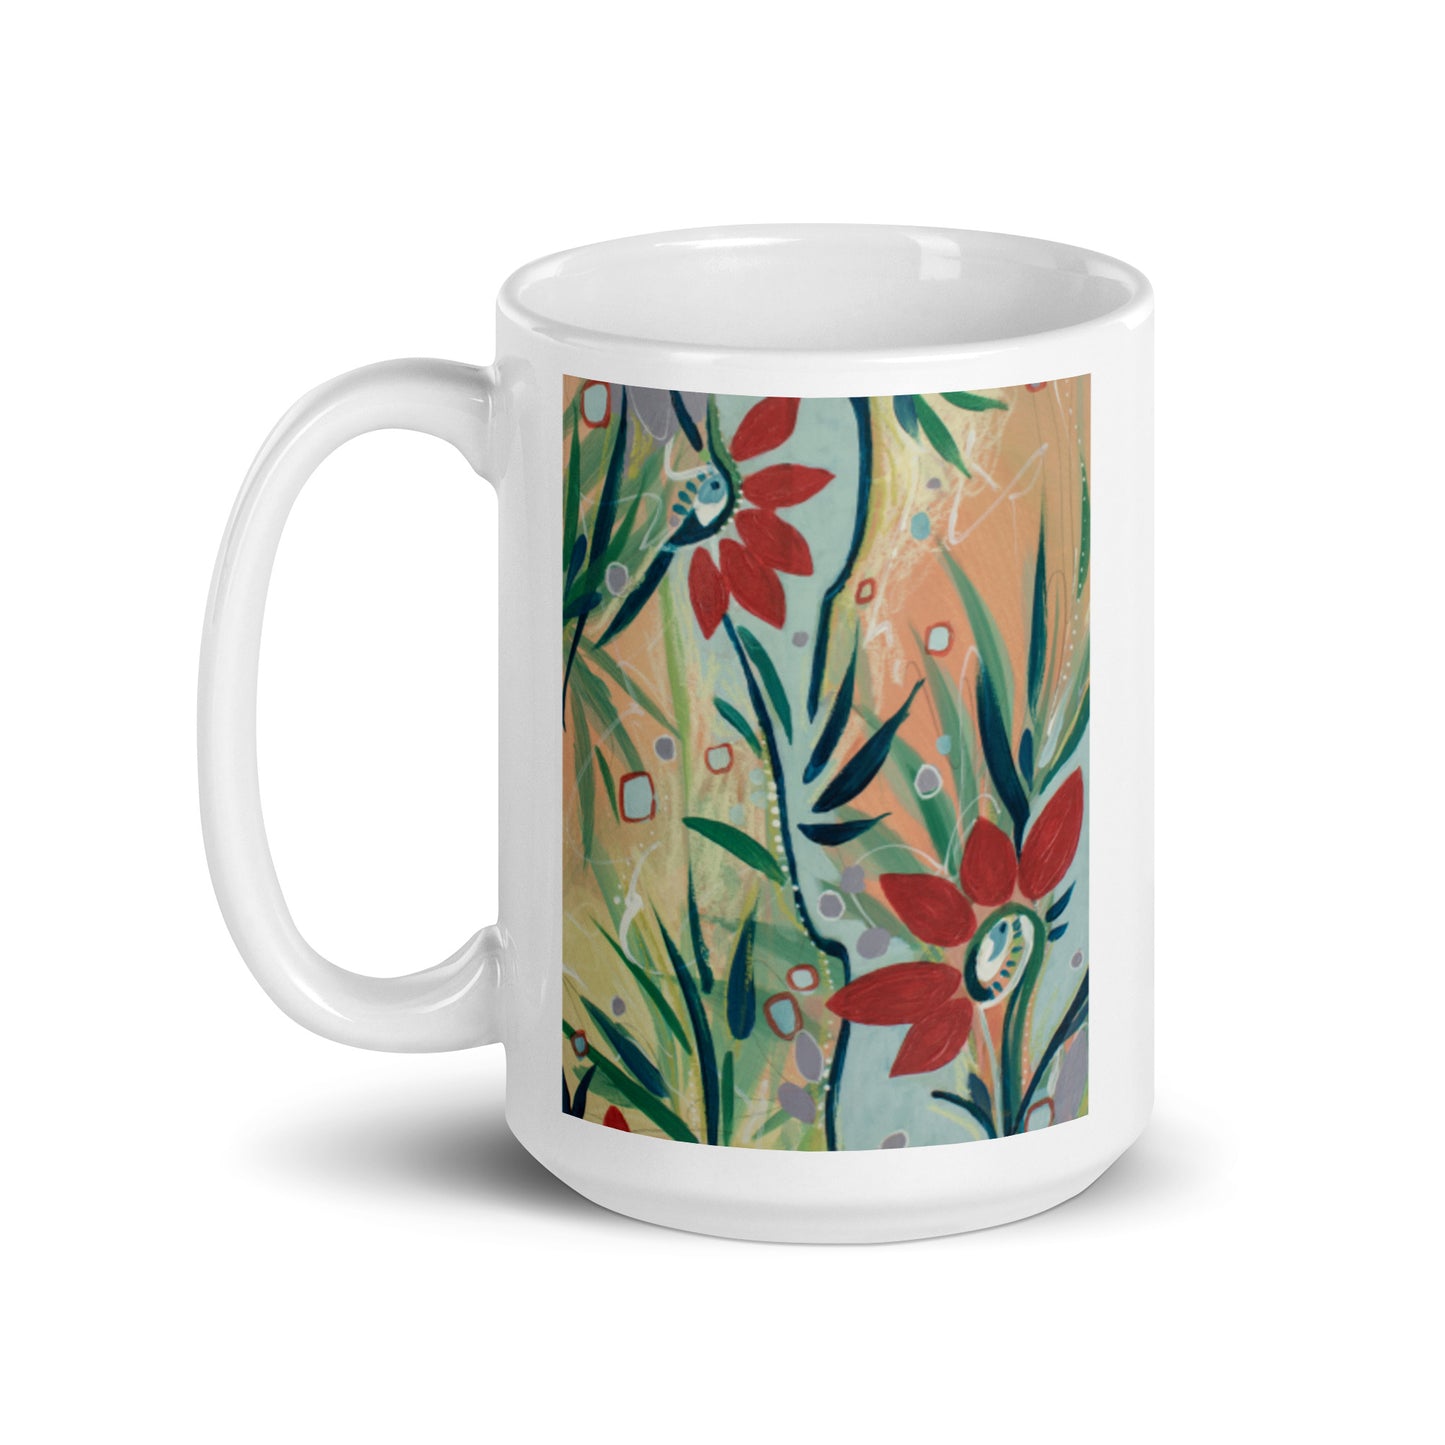 Footsteps in the Distance, 2-3 White glossy mug